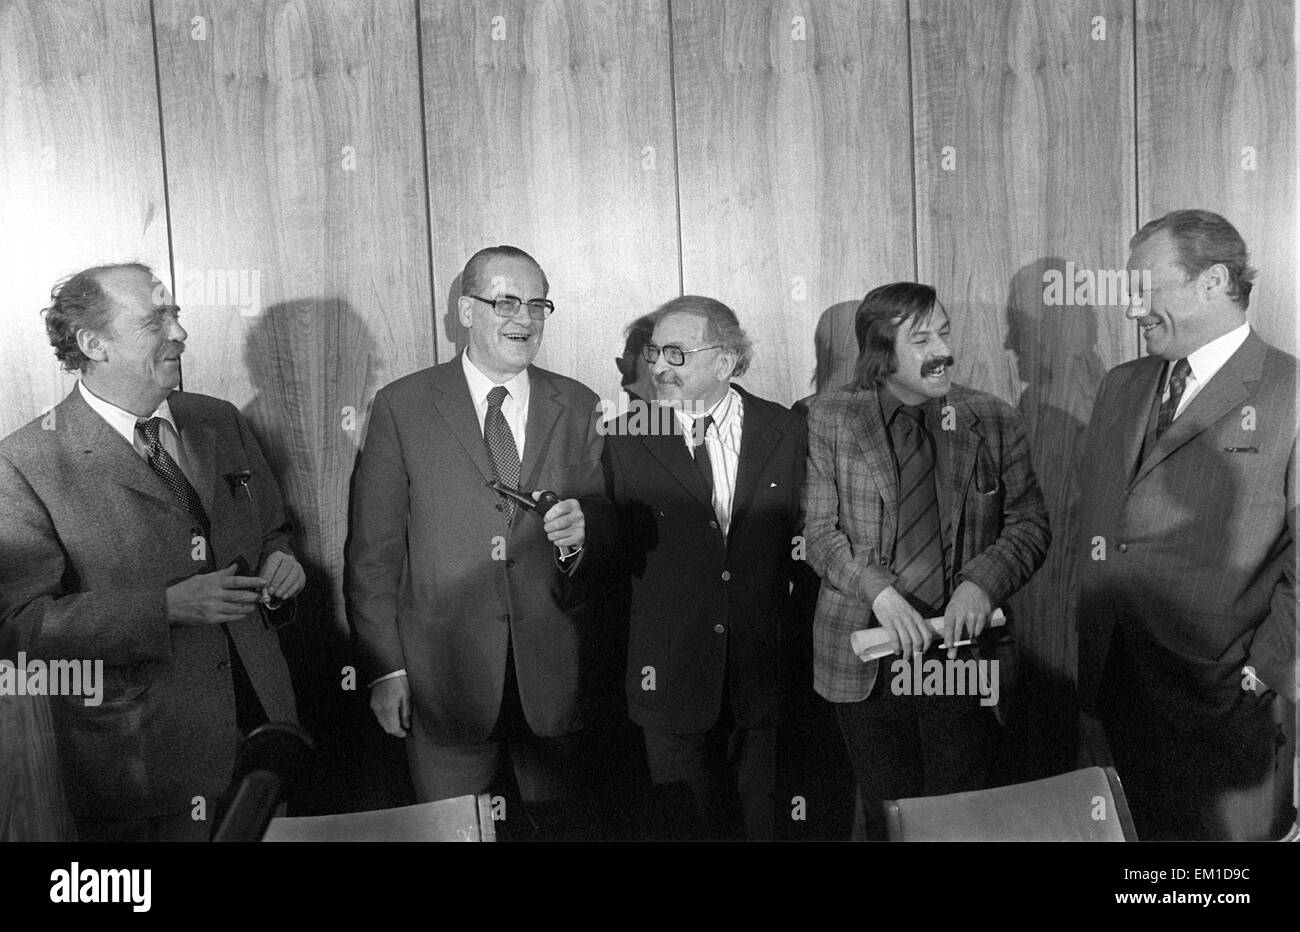 (FILE) - An archive picture, dated 13 March 1974, shows German authors Heinrich Boell (l), Thaddaeus Troll (c) and Guenter Grass (2nd r) talking to then-Chairman of the SPD's parliamentary faction Herbert Wehner (2nd l) and German Chancellor Willy Brandt (r) in Bonn, Germany. Goettingen-based publishing house Steidl confirmed on 13 April 2015 the death of Guenther Grass. Photo: Egon Steiner/dpa Stock Photo